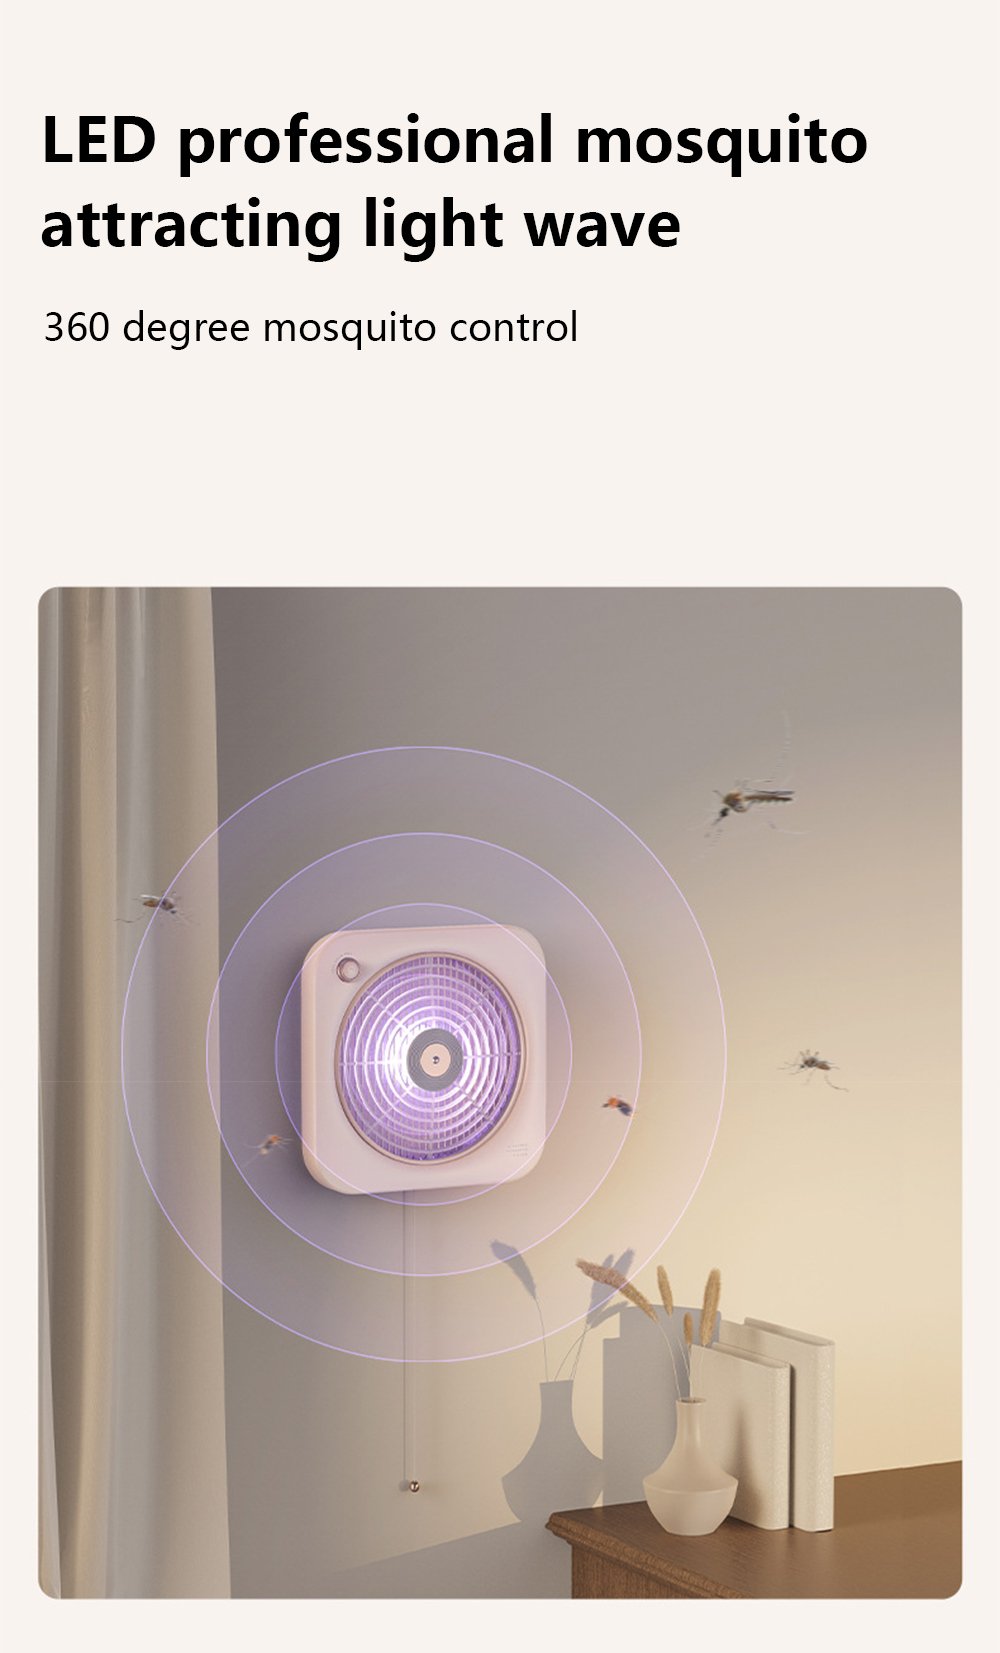 MAOXIN-Multifunctional-Mosquito-Killer-Lamp-Desktop-VerticalWall-Mount-Mosquito-Lamp-With-Small-Nigh-1953884-2